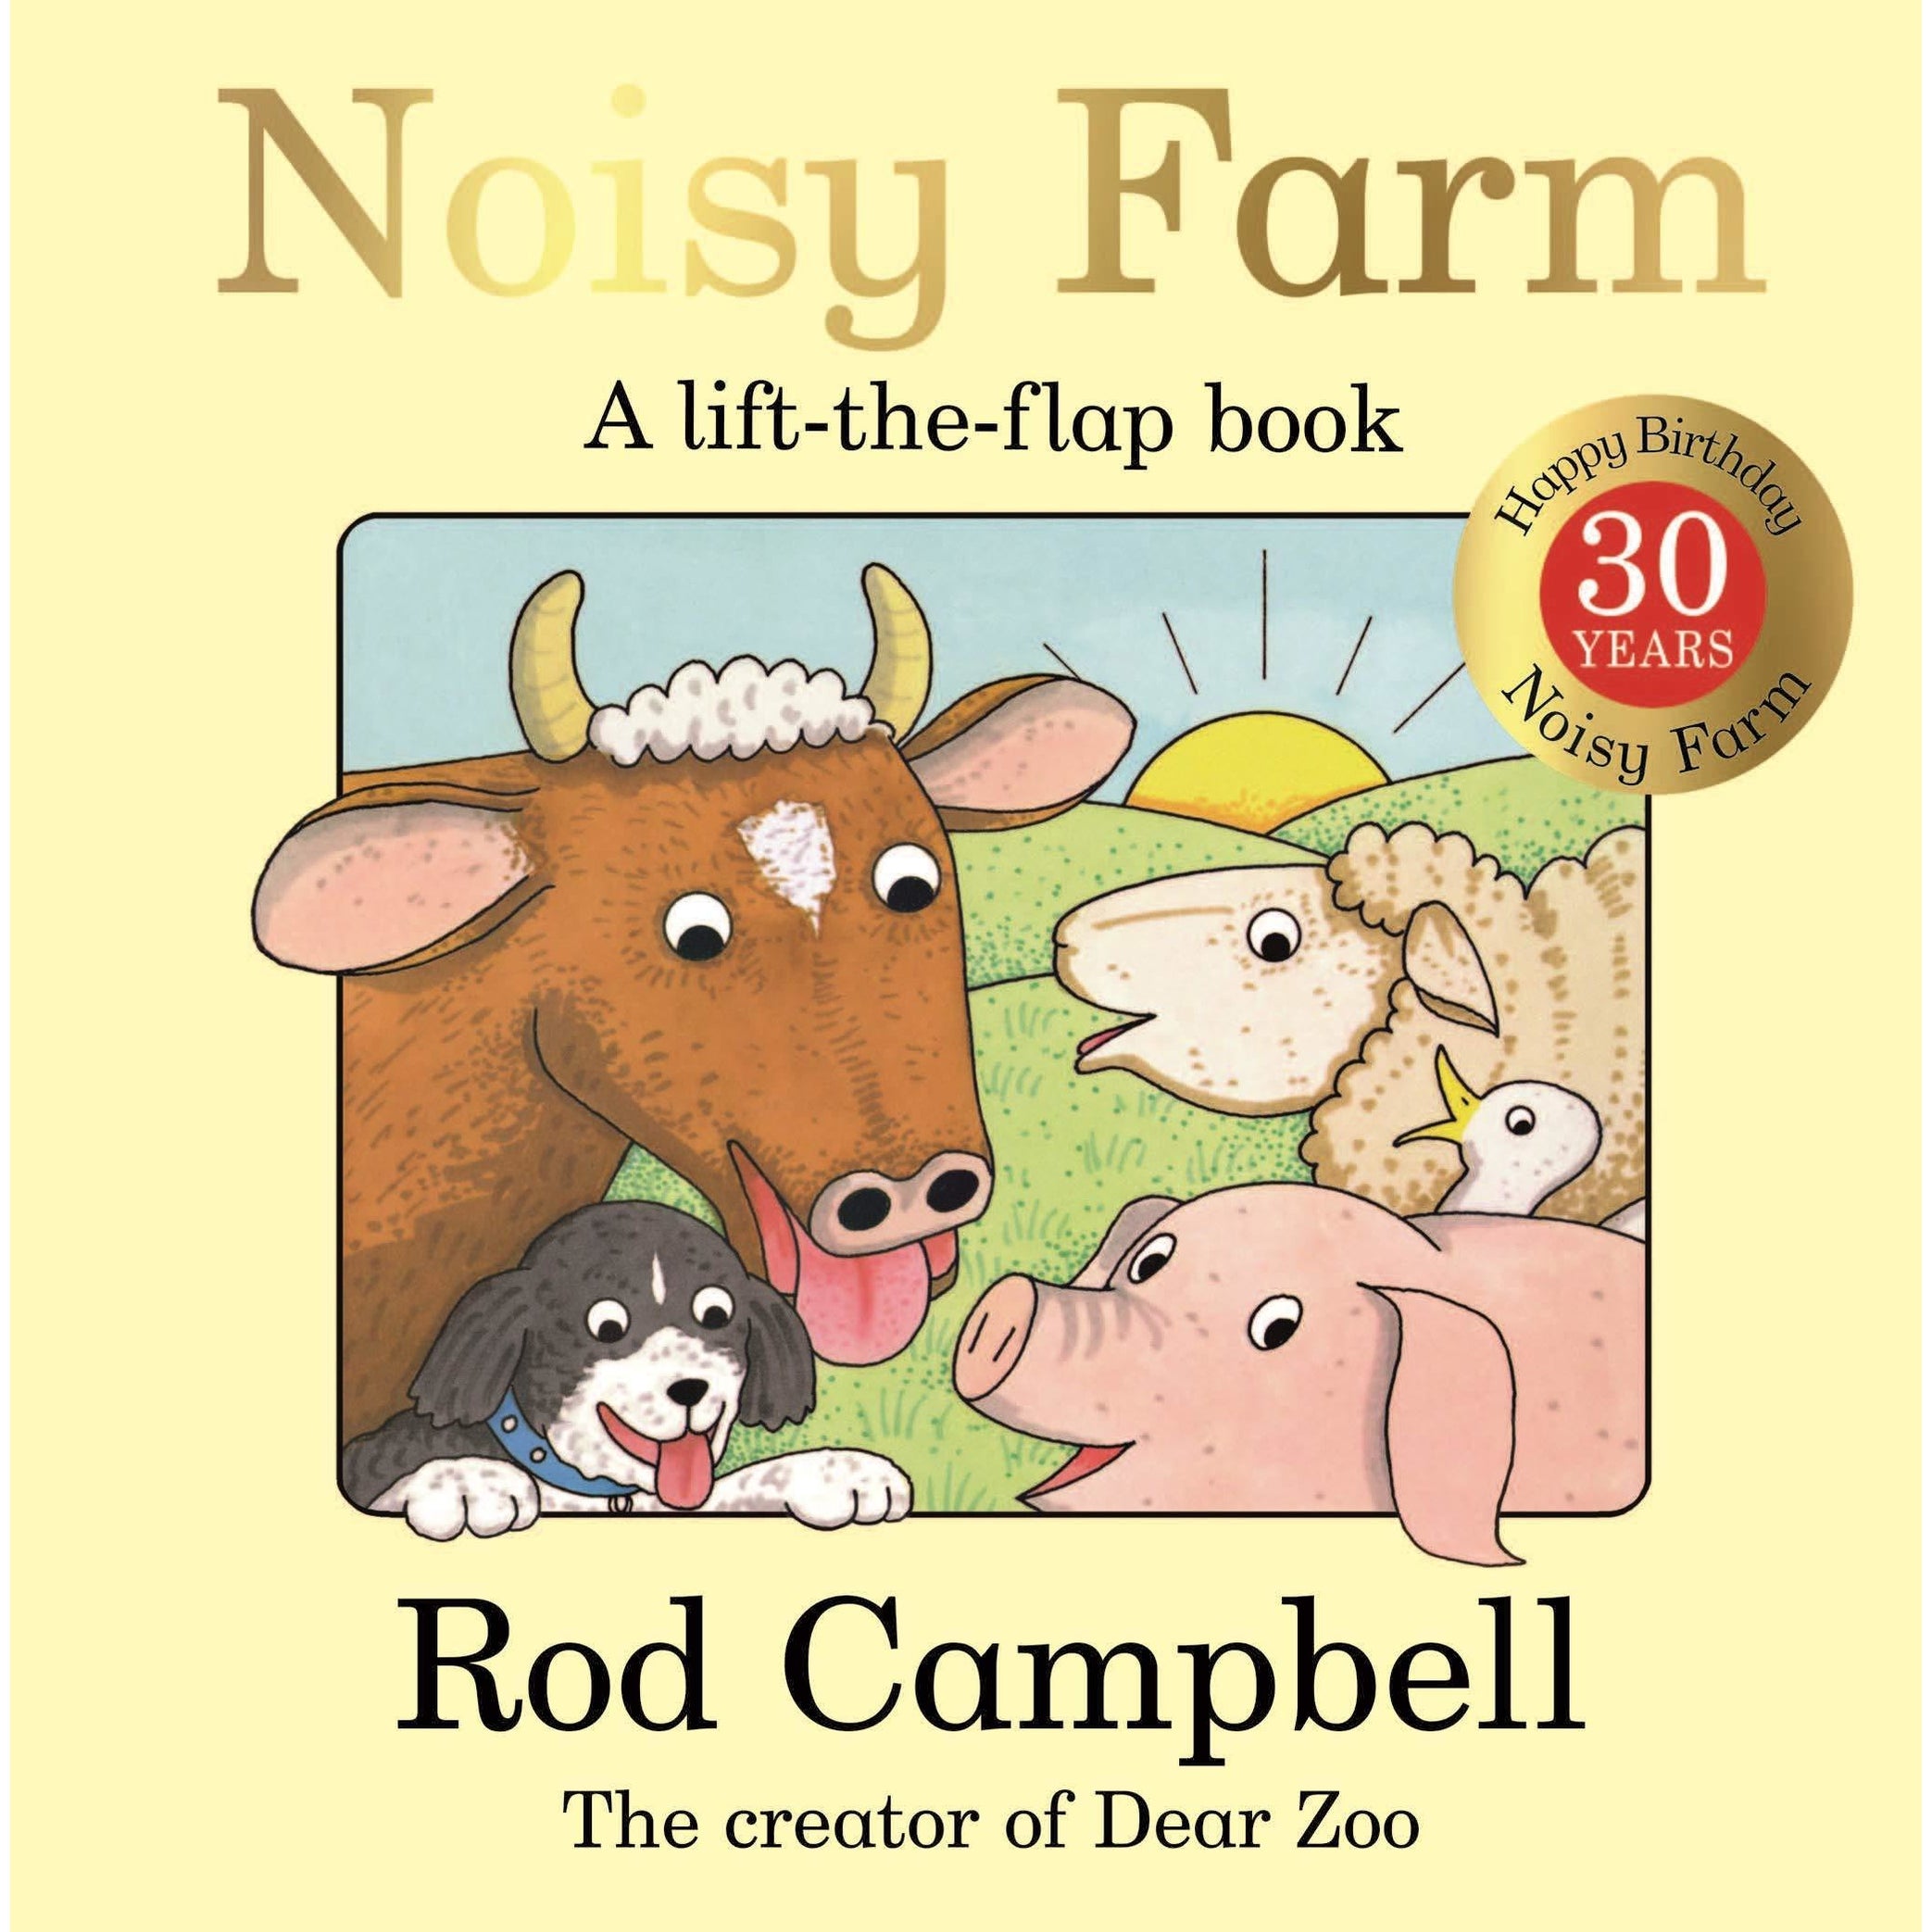 rod campbell books